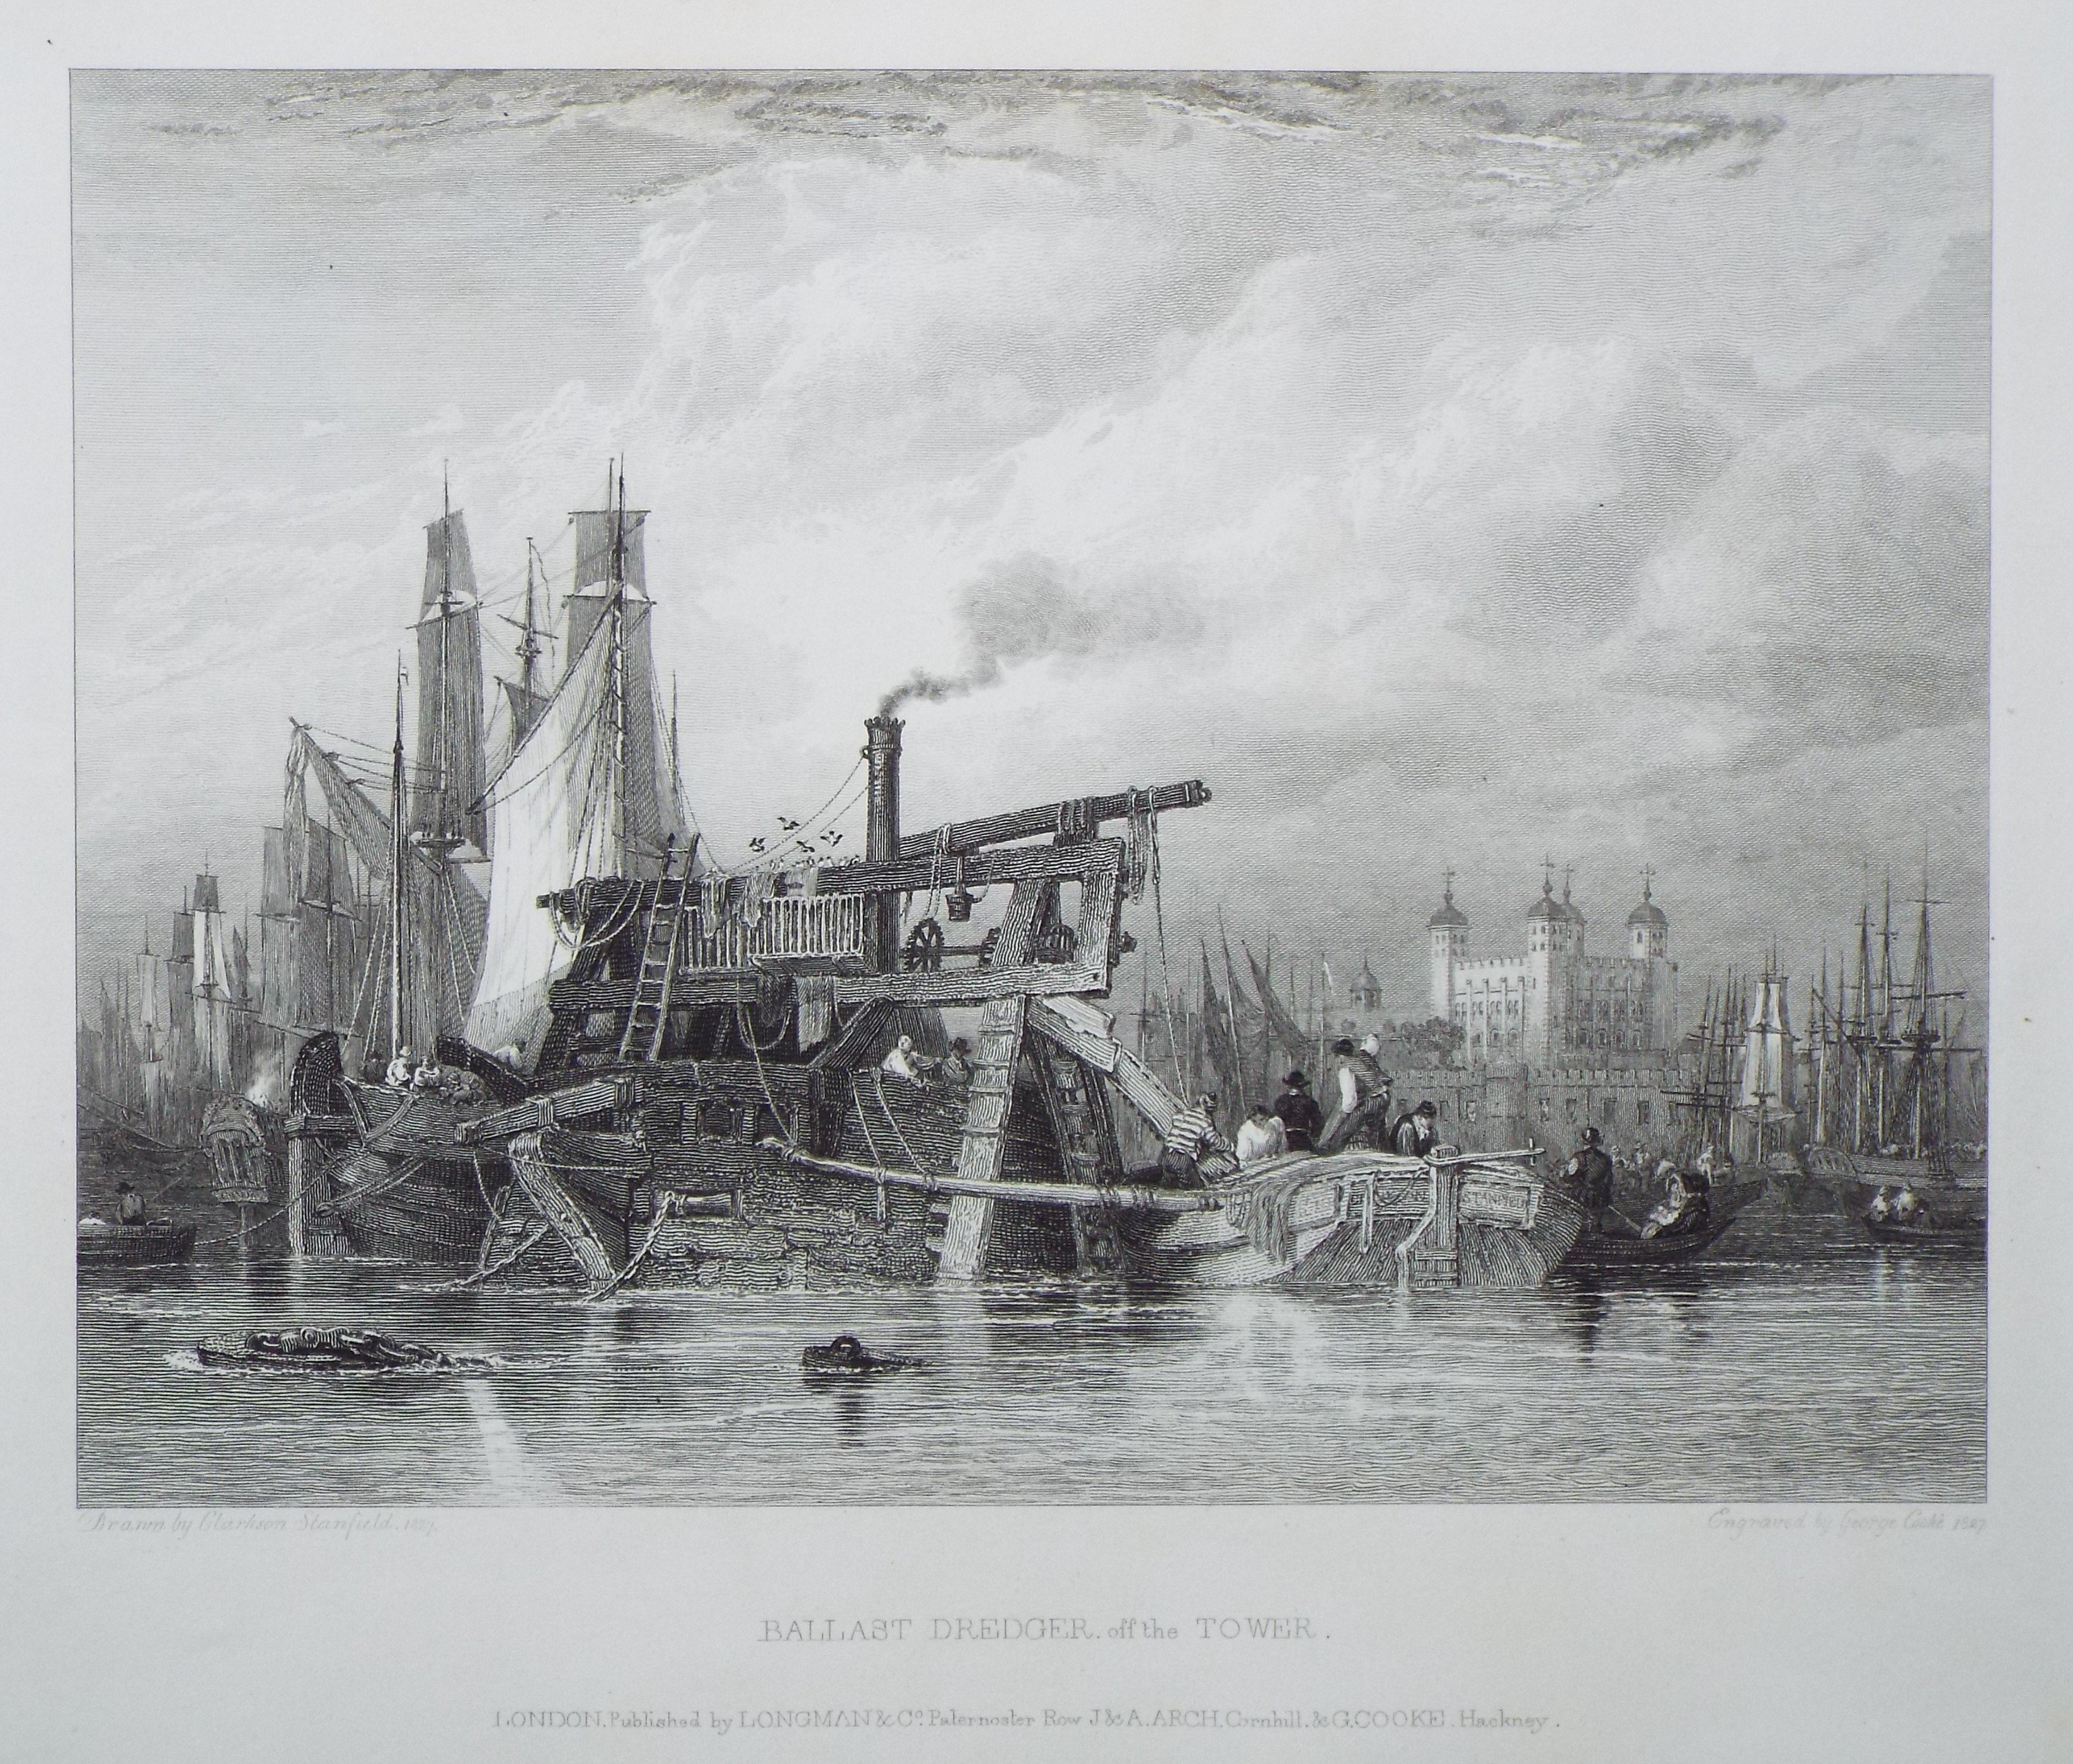 Print - Ballast Dredger off the Tower - Cooke